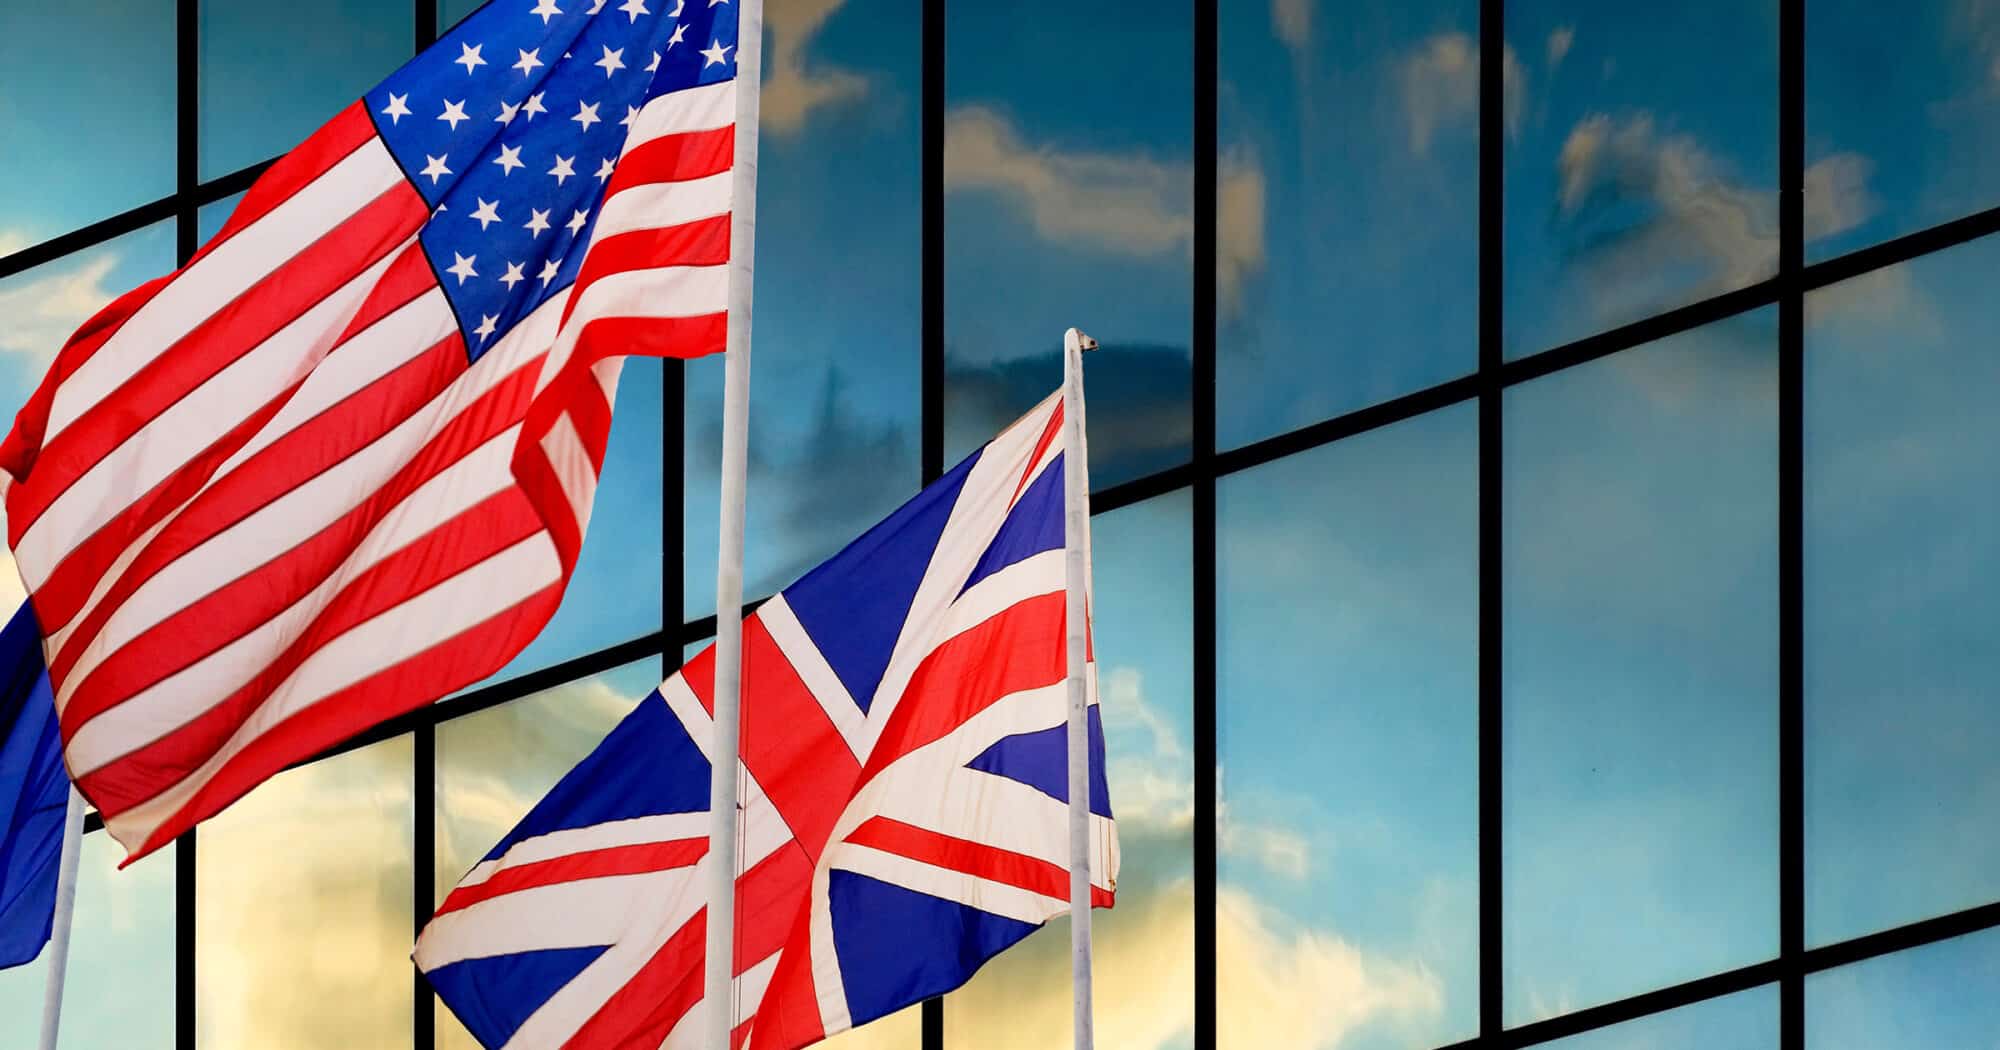 The United States and United Kingdom flags in the wind.